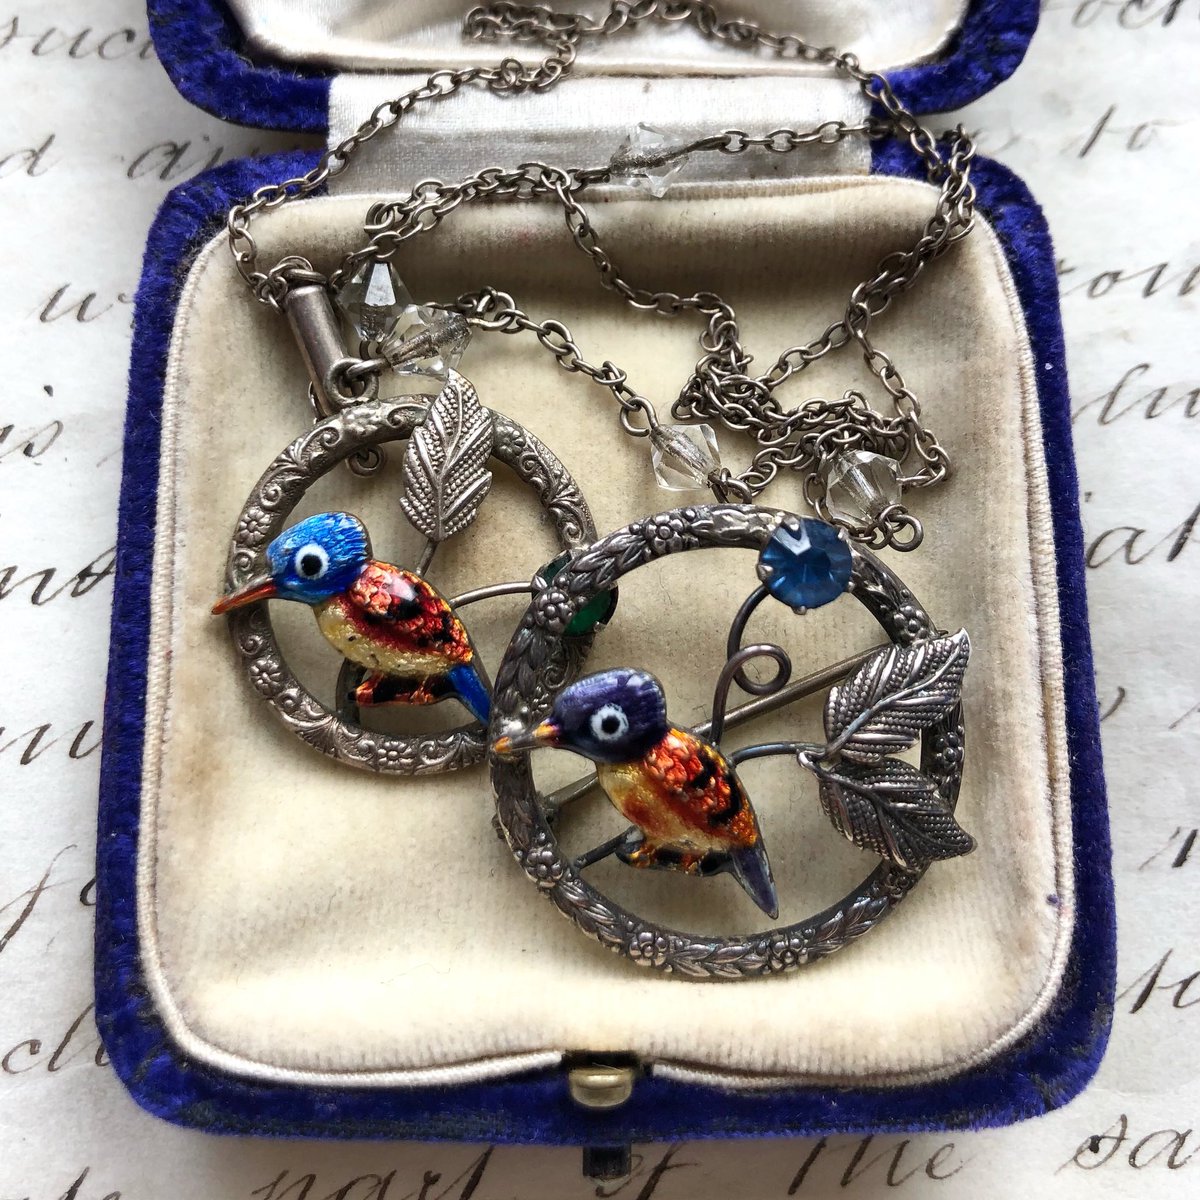 💙New Stock @ Melksham Arcade💙
These Are The Most Sweetest Sterling Silver & Enamelled Jewellery Pieces Made By The Ward Brothers! 
Silver & Enamel Kingfisher Brooch. £45.
Silver & Enamel Kingfisher Necklace. £48.
#wardbrothers #sterlingsilver #silverenamel #silver #kingfisher